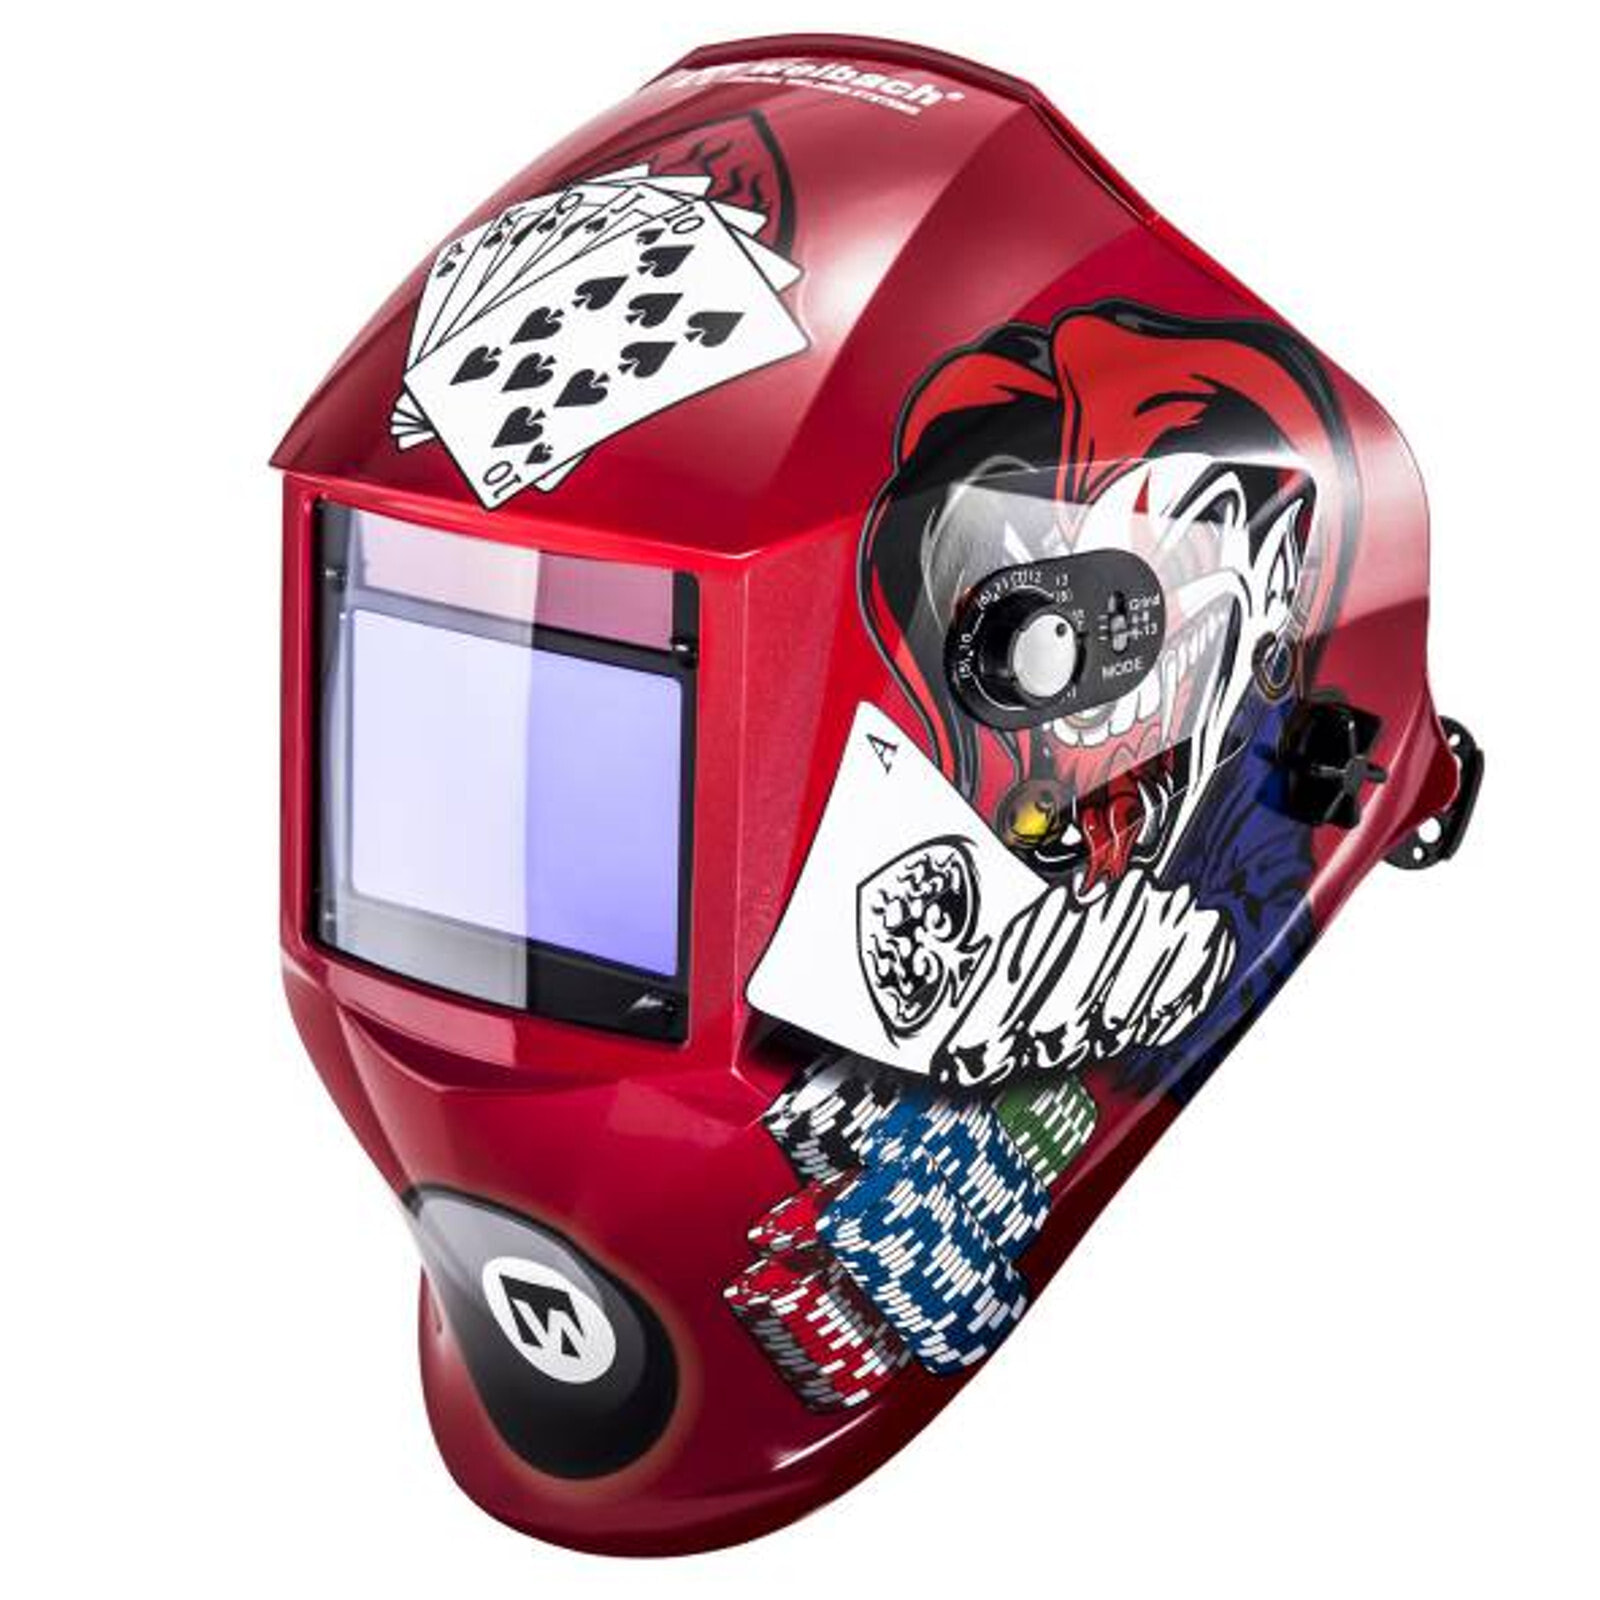 Automatic self-darkening welding helmet mask with grind POKERFACE function